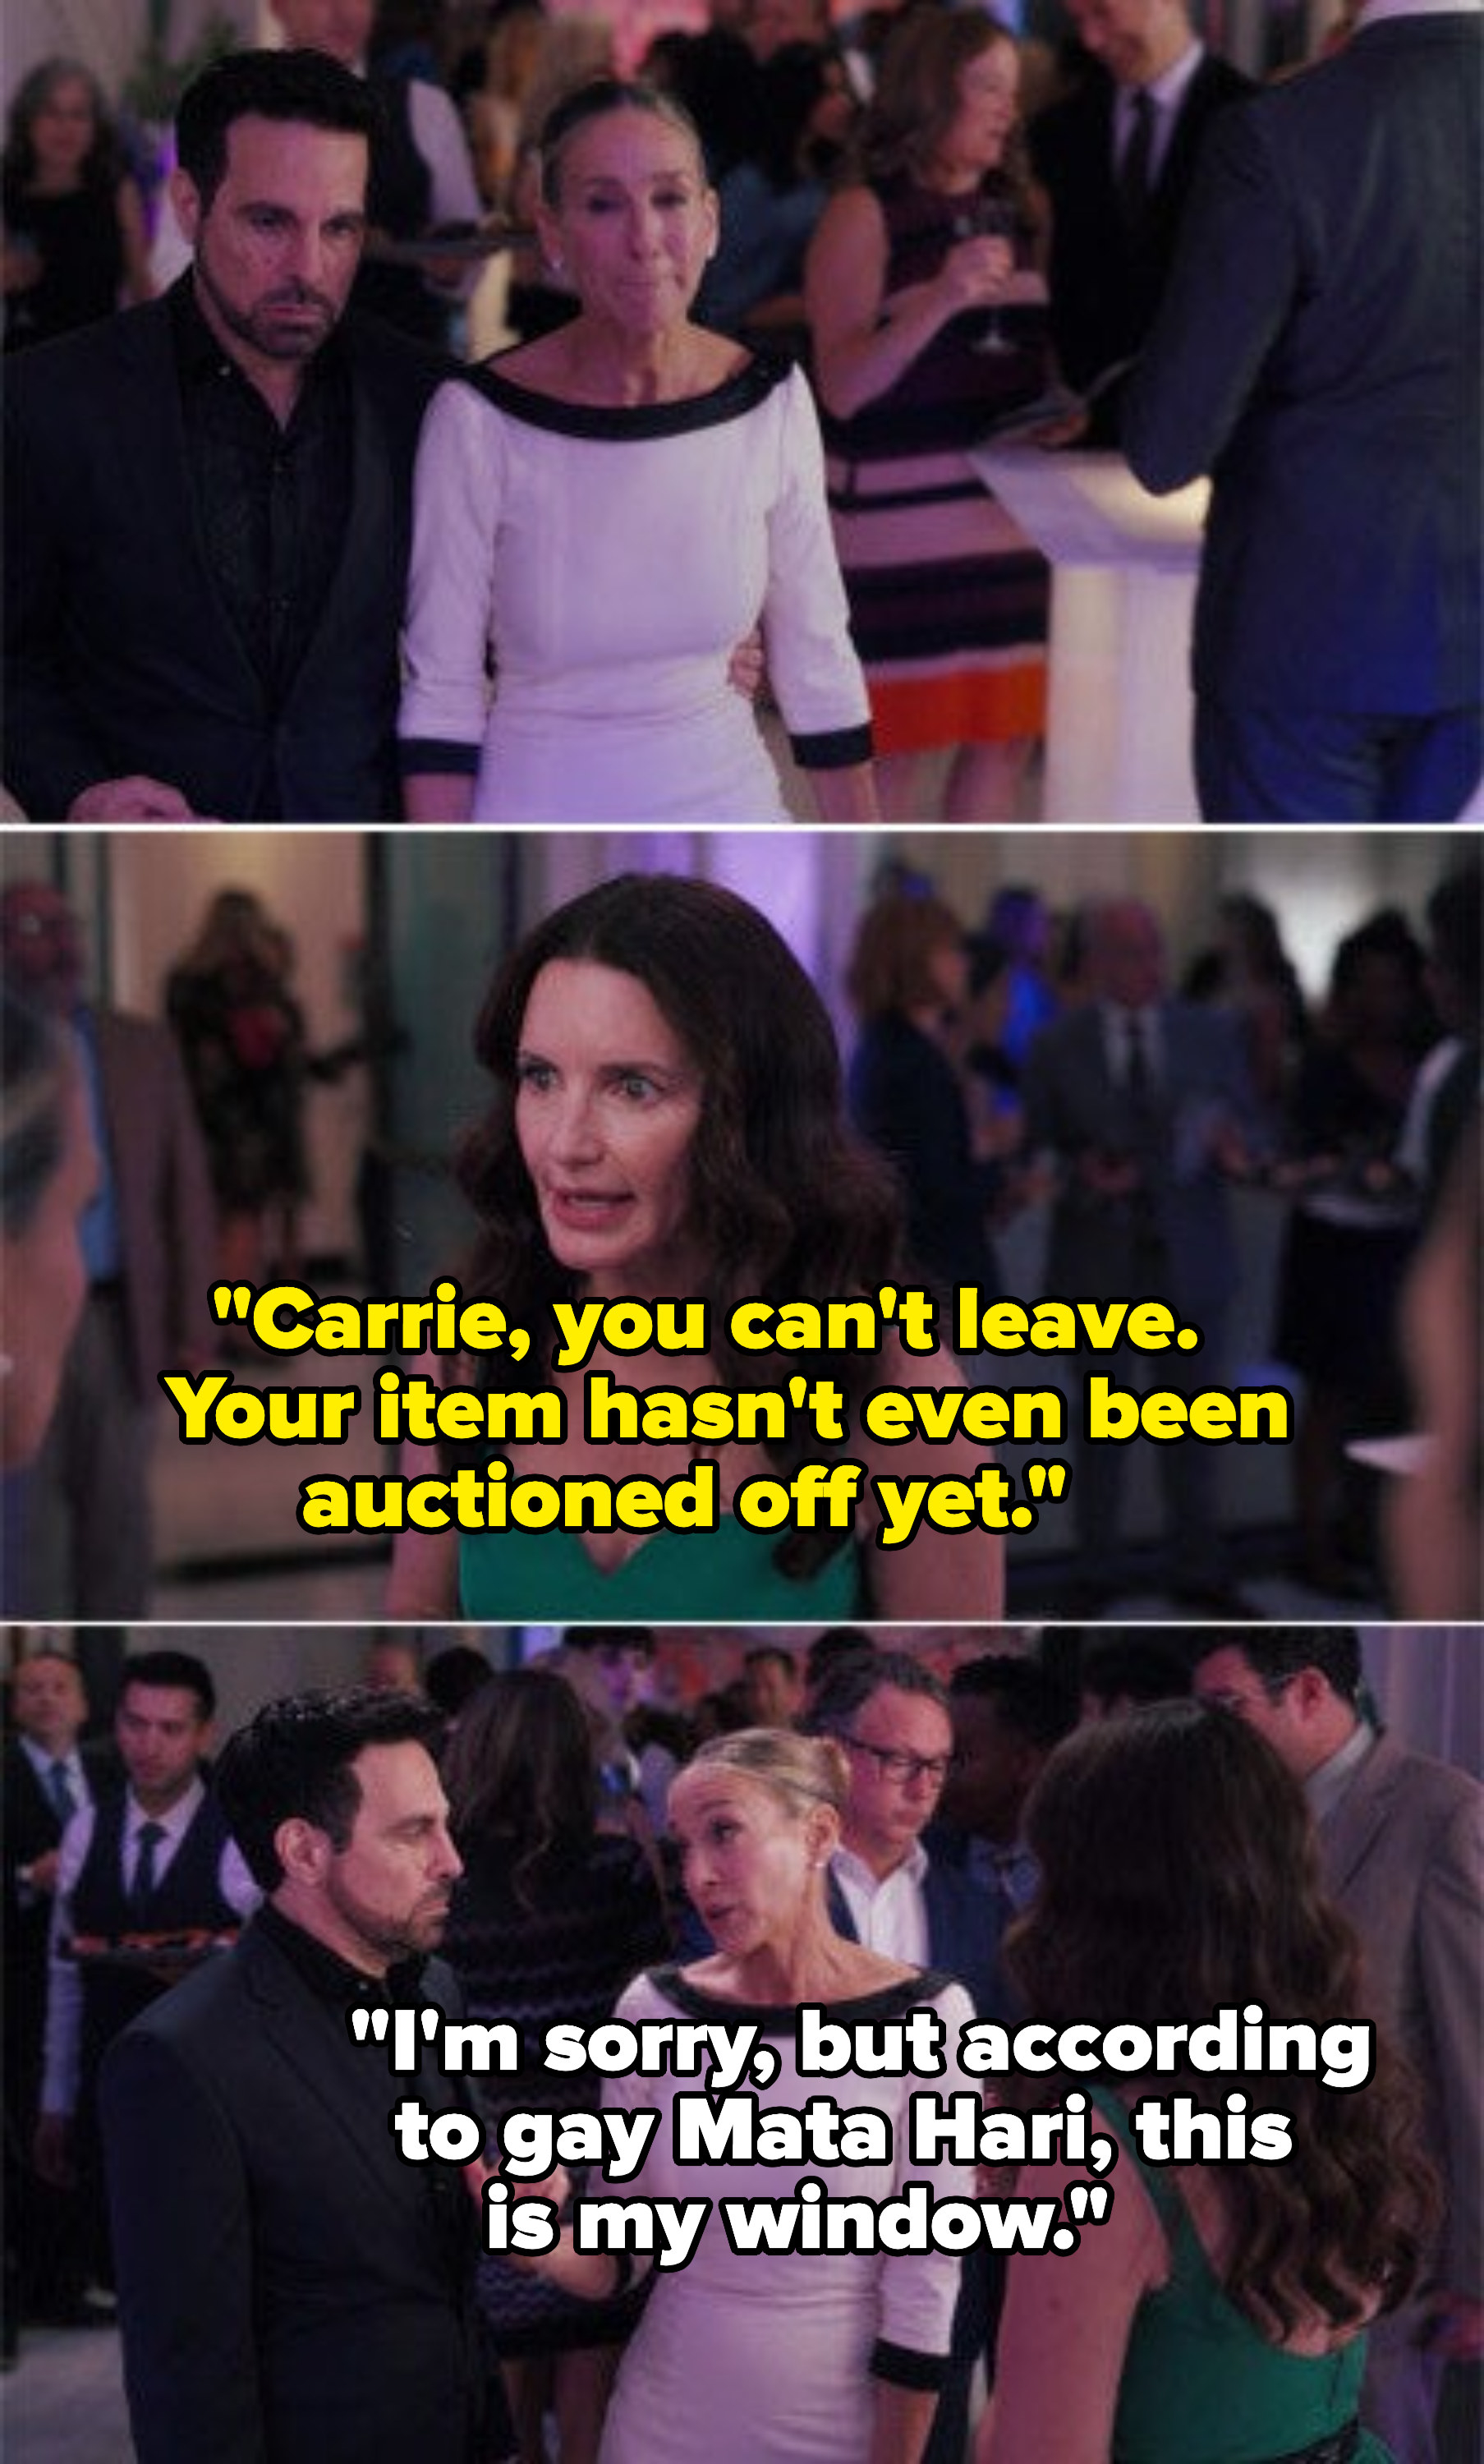 Carrie trying to leave the auction where she is an item but Charlotte stopping her